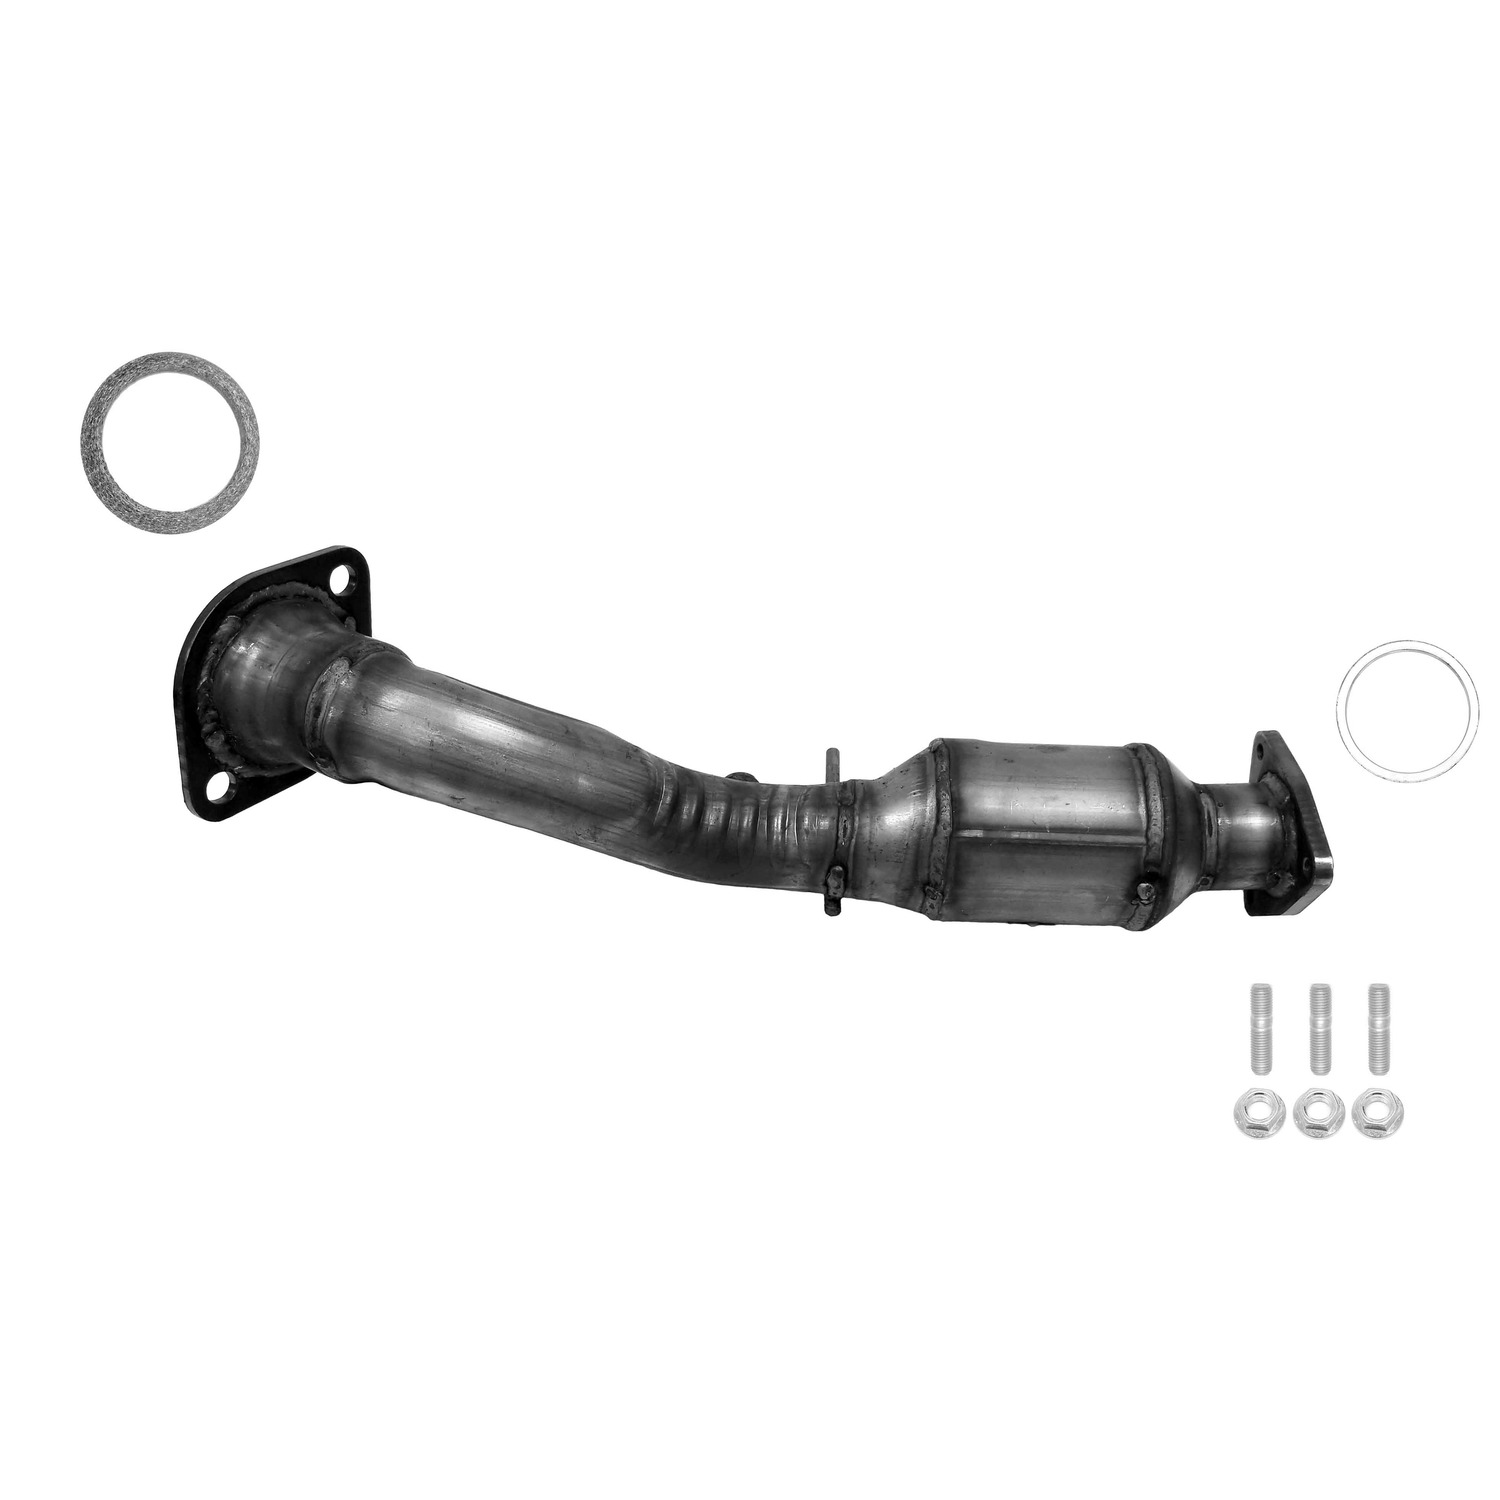 Fits:2013 - 2015 Acura ILX with 2.4L Engine/2012 - 2015 Honda Civic with 2.4L Engine